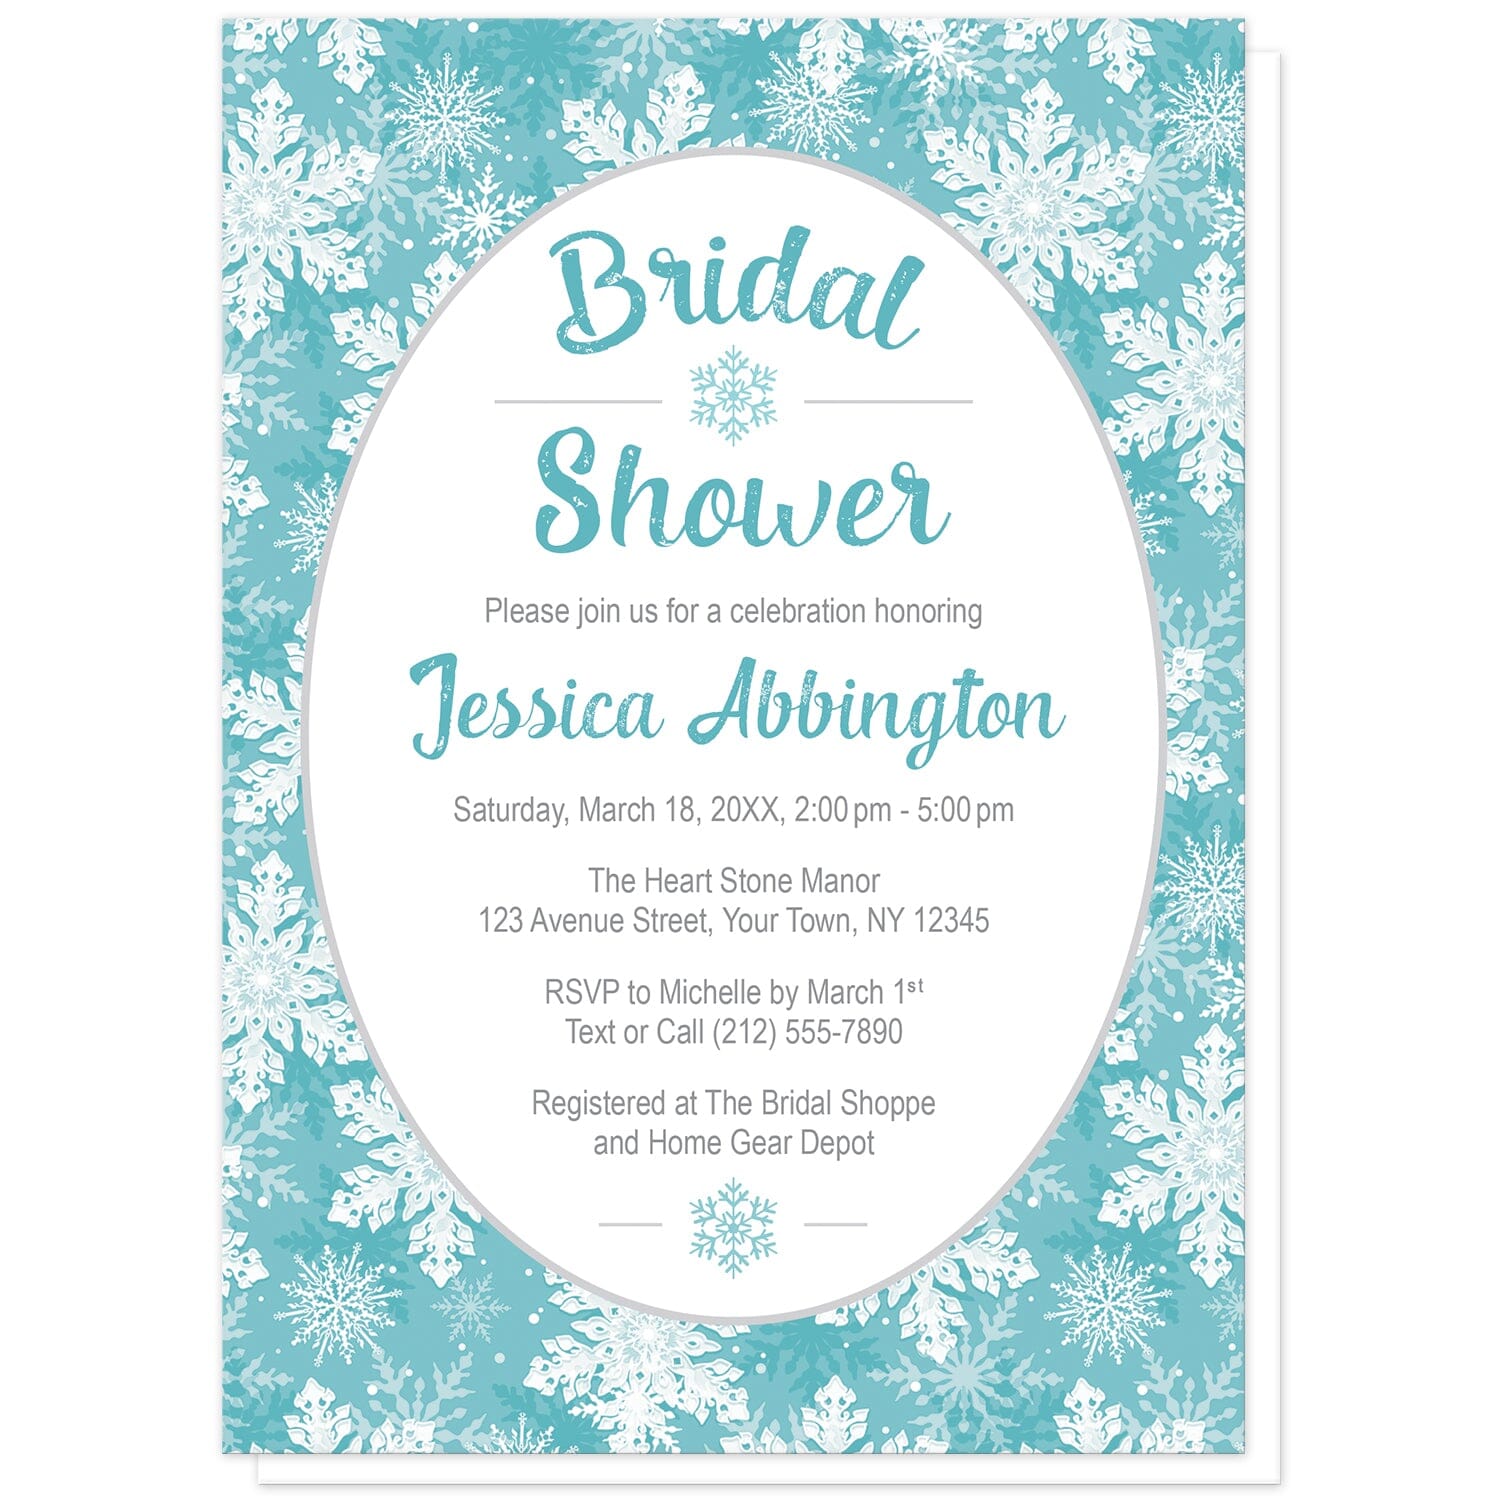 Teal Snowflake Bridal Shower Invitations at Artistically Invited. Beautifully ornate teal snowflake bridal shower invitations designed with your personalized celebration details custom printed in teal and gray in a white oval frame design over a teal, turquoise, and white snowflake pattern background.